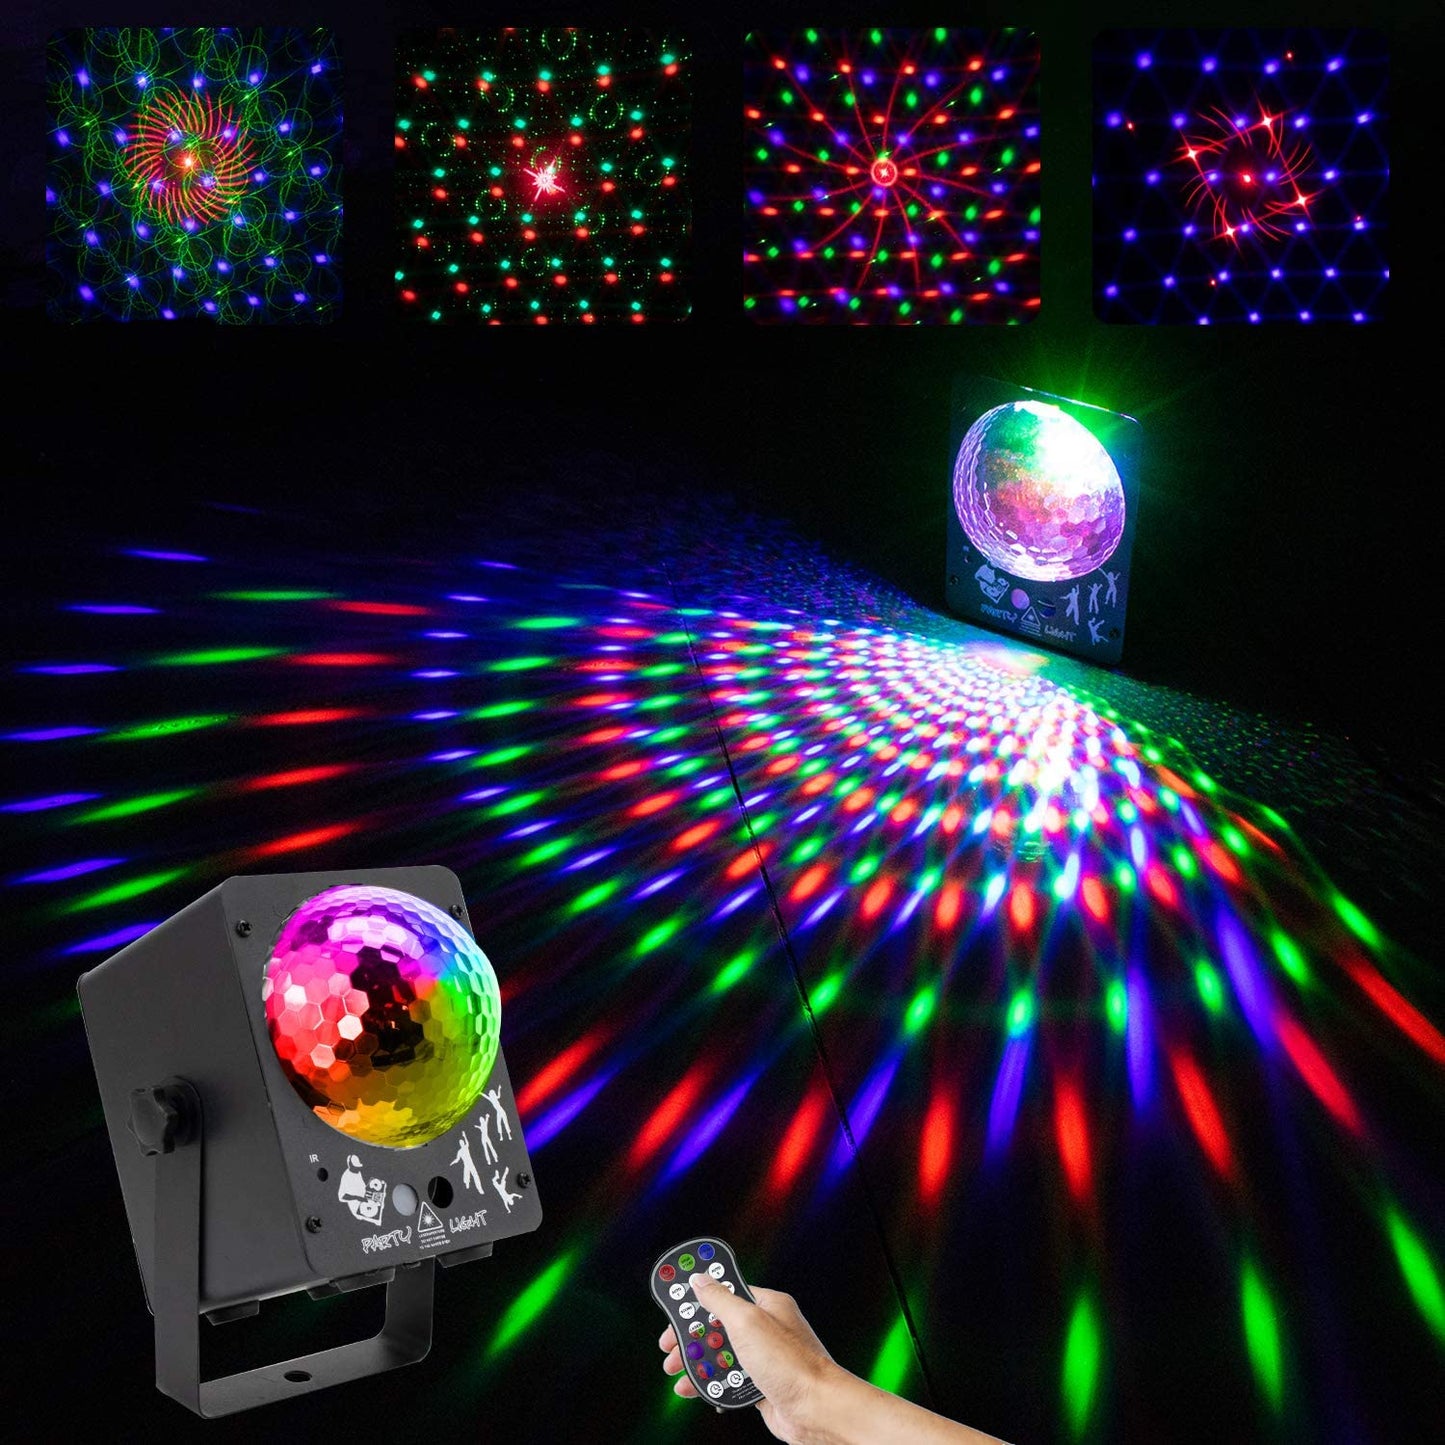 Party Light Stage Laser Light Mini Flash Strobe Light DJ Disco Lights Projector by Sound Activated Remote Control for Stage Lighting Christmas Parties